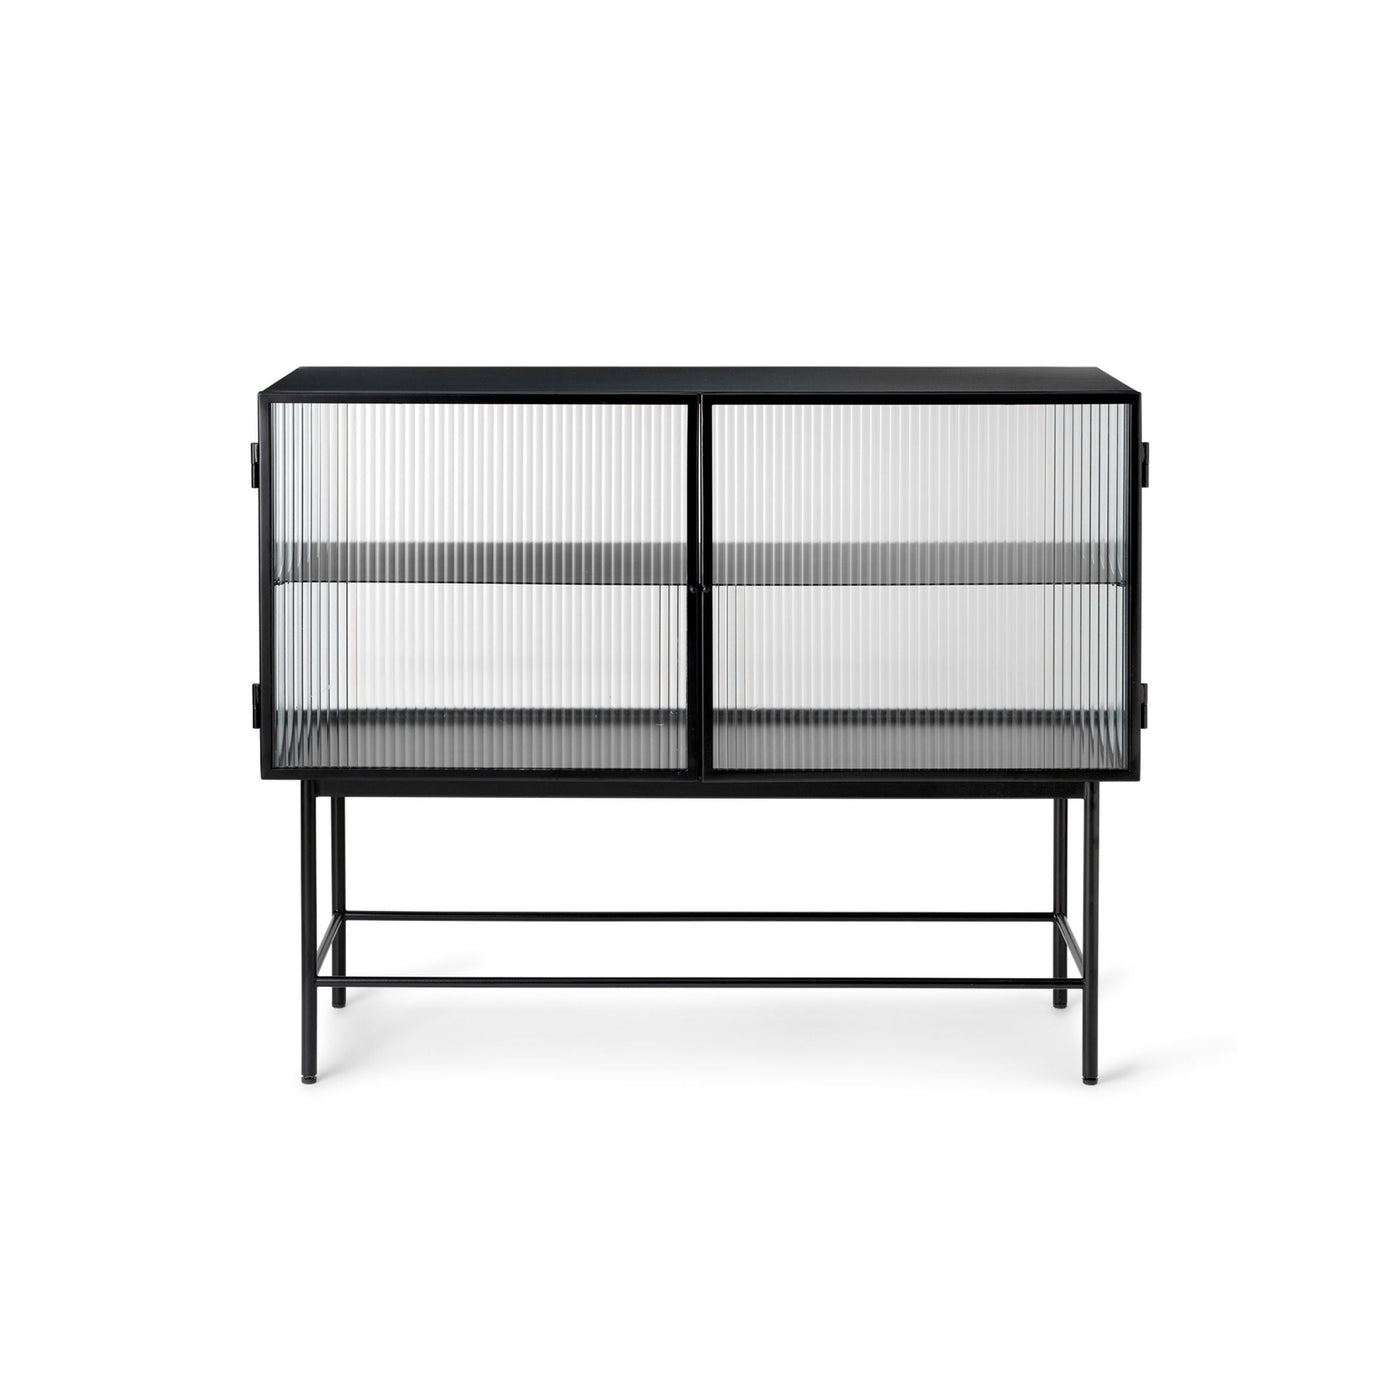 Ferm Living Haze sideboard in black. Available from someday designs. #colour_black